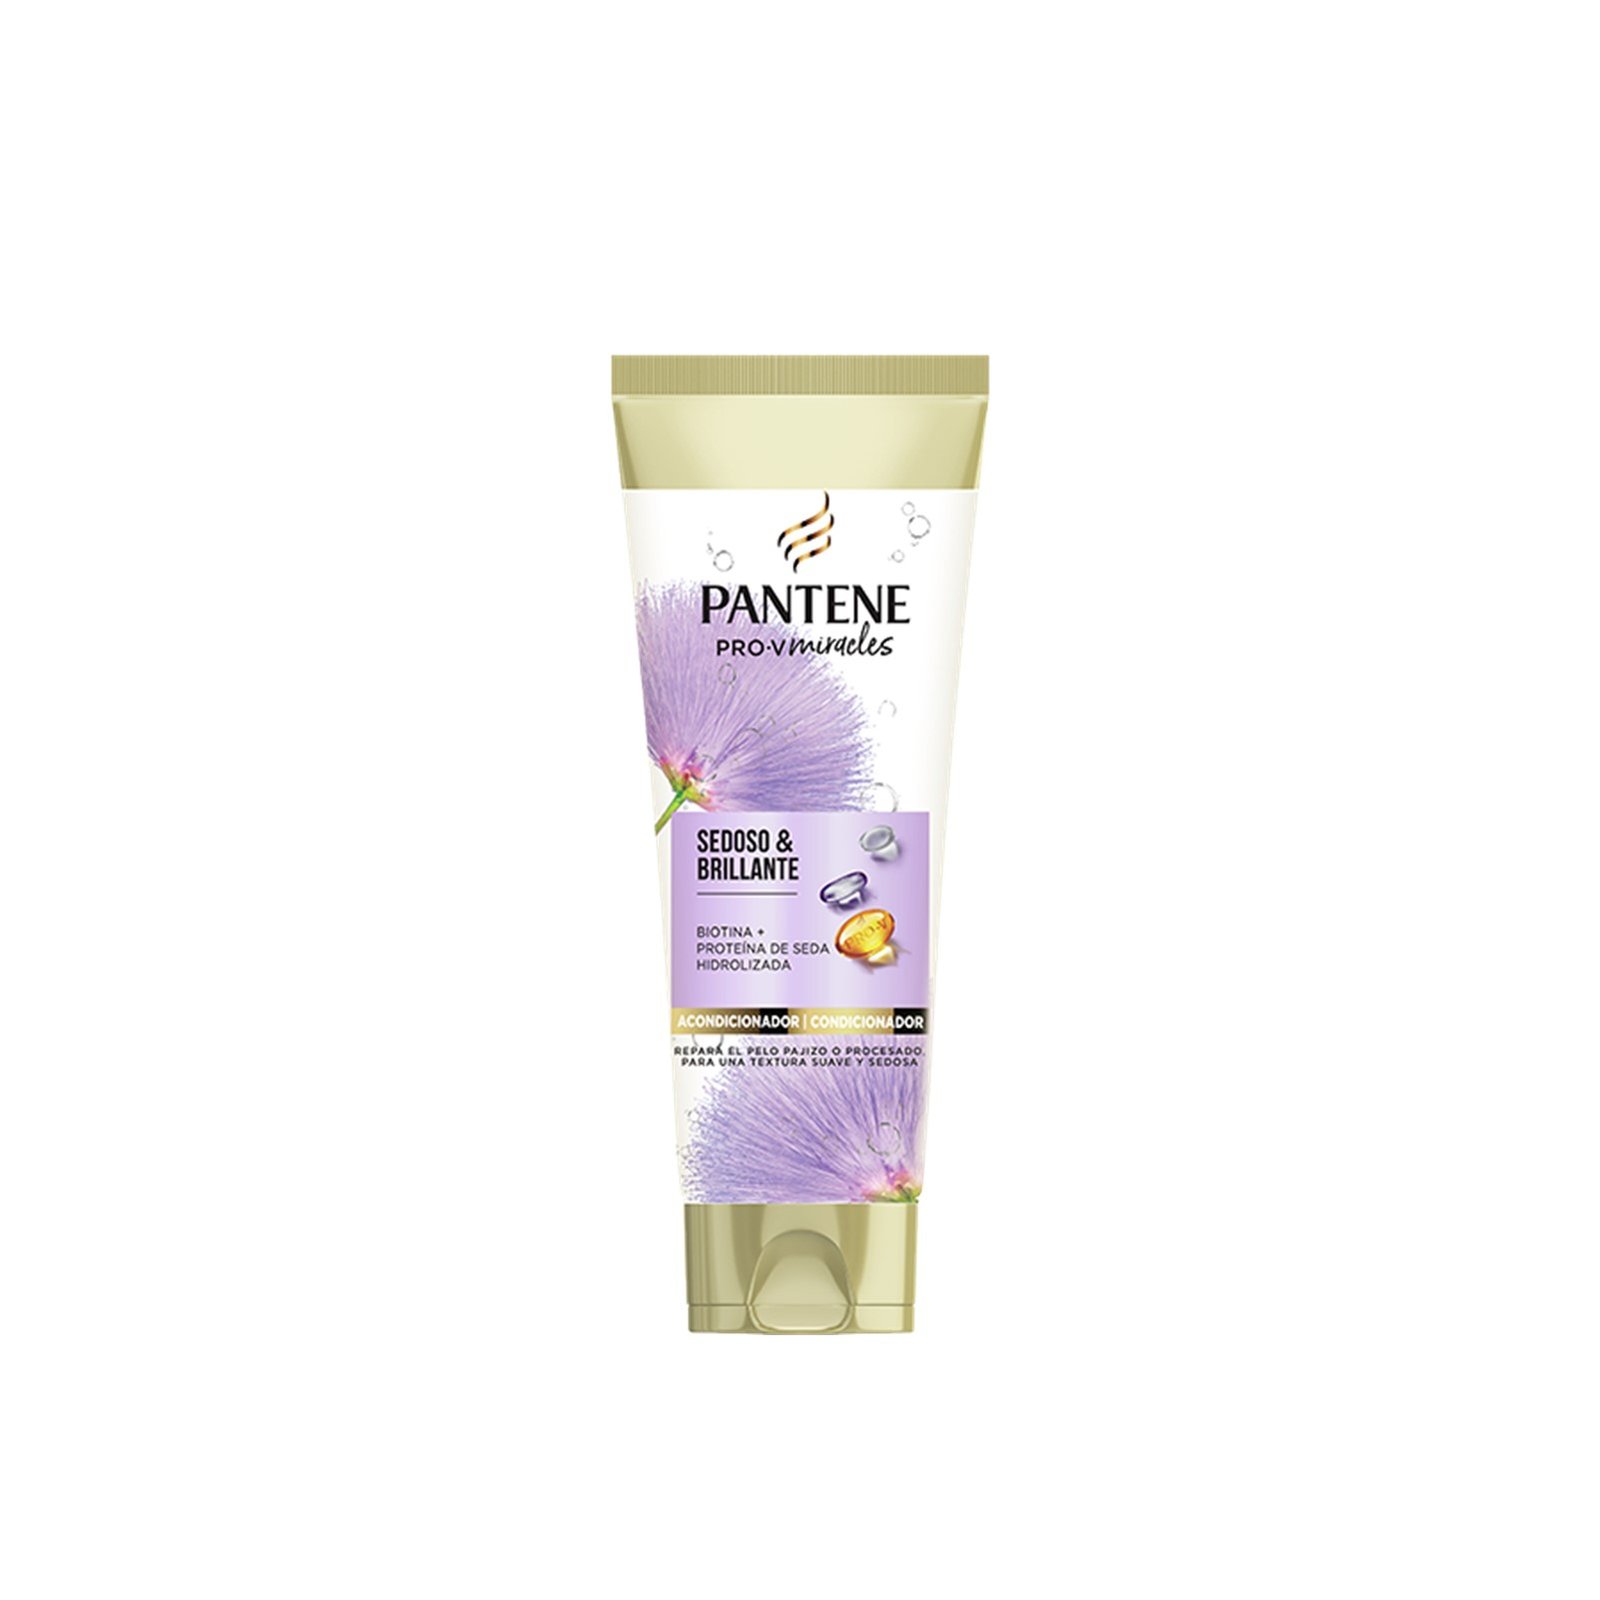 Pantene Pro-V Miracles Silky & Glowing Conditioner 200ml (6.7 fl oz)